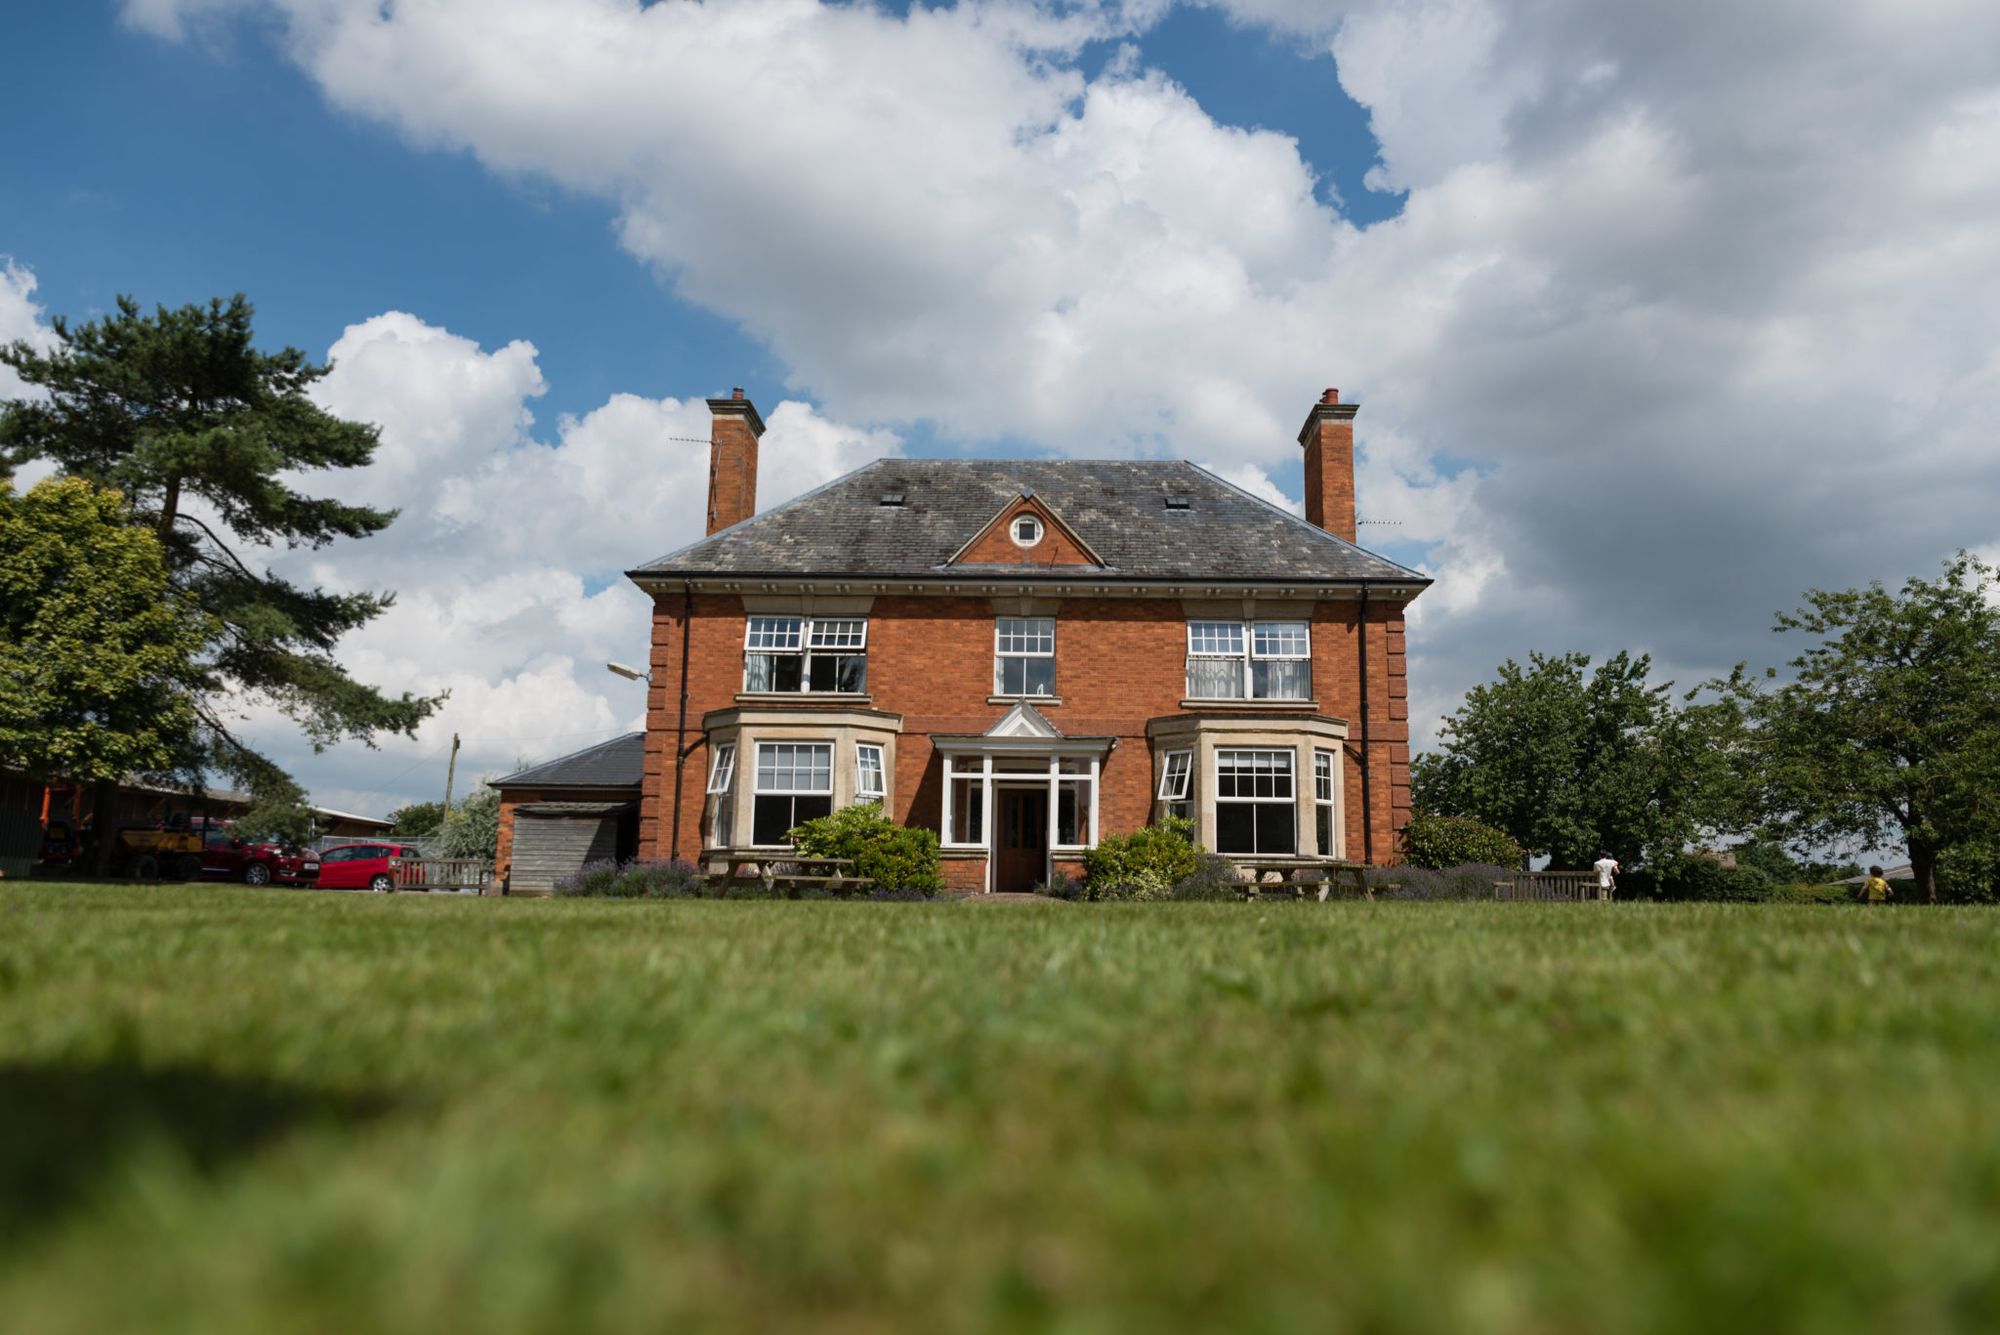 The impressive farmhouse can be viewed in the background which guests can hire the night before and the night of the wedding. The photo is taken low down with the gorgeous lawn out of focus in the foreground. Photo thanks to Tux and Tales Photography.